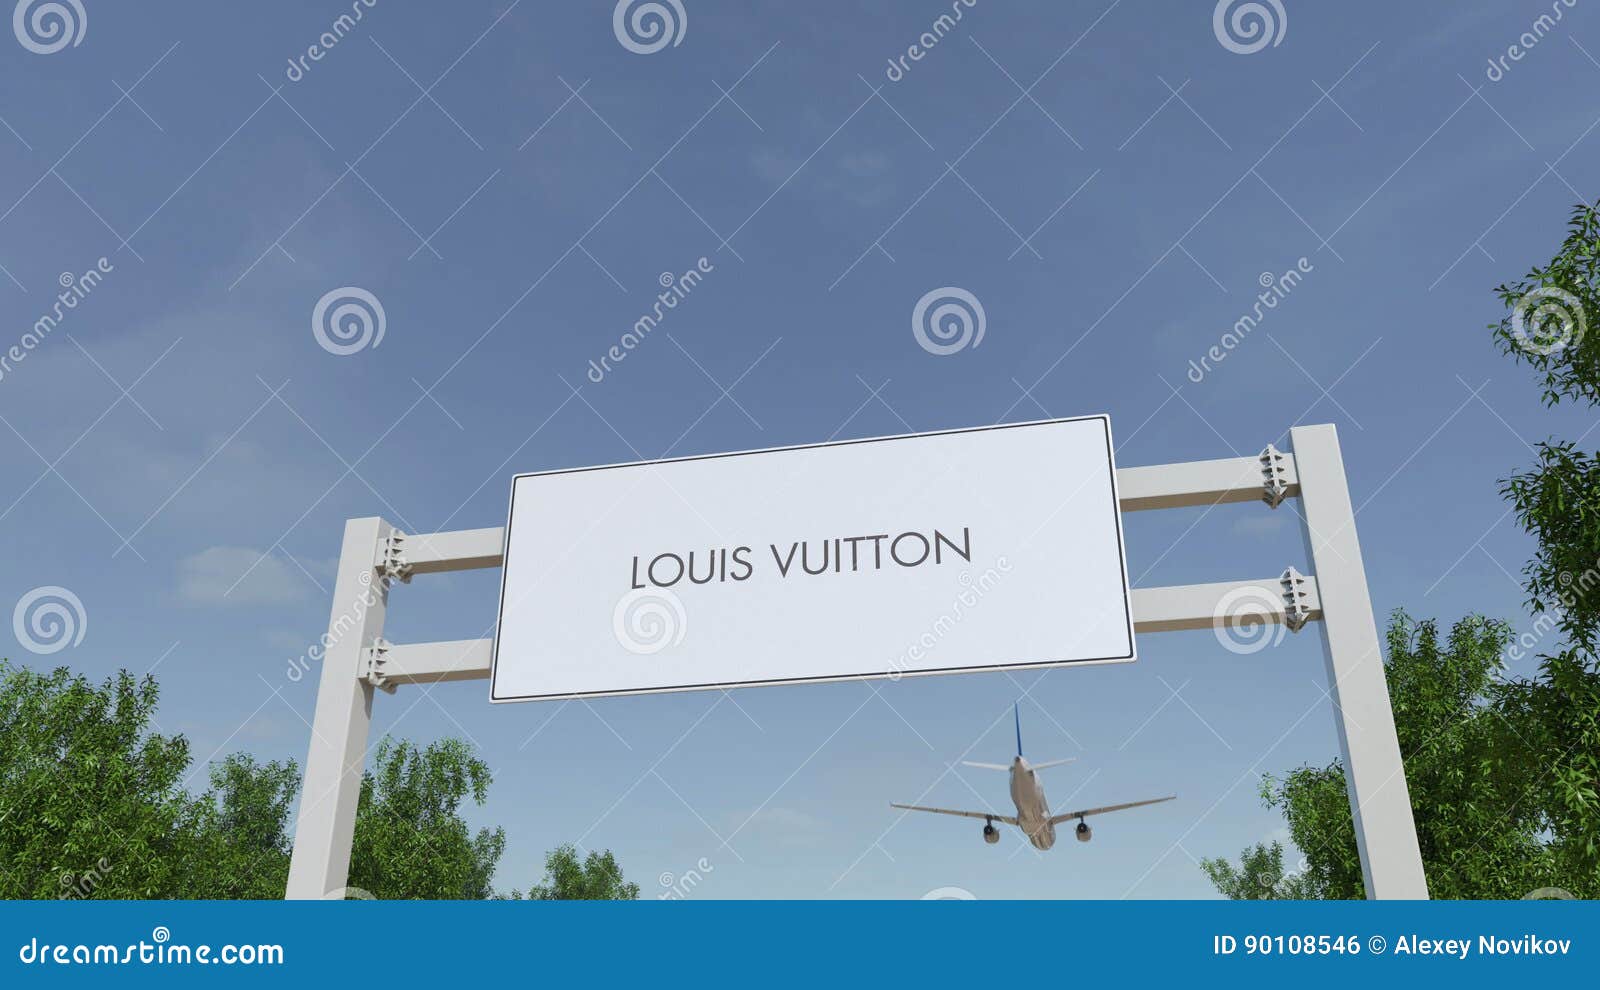 Airplane Flying Over Advertising Billboard with Louis Vuitton Logo.  Editorial 3D Rendering Editorial Photo - Image of popular, advertising:  90108546